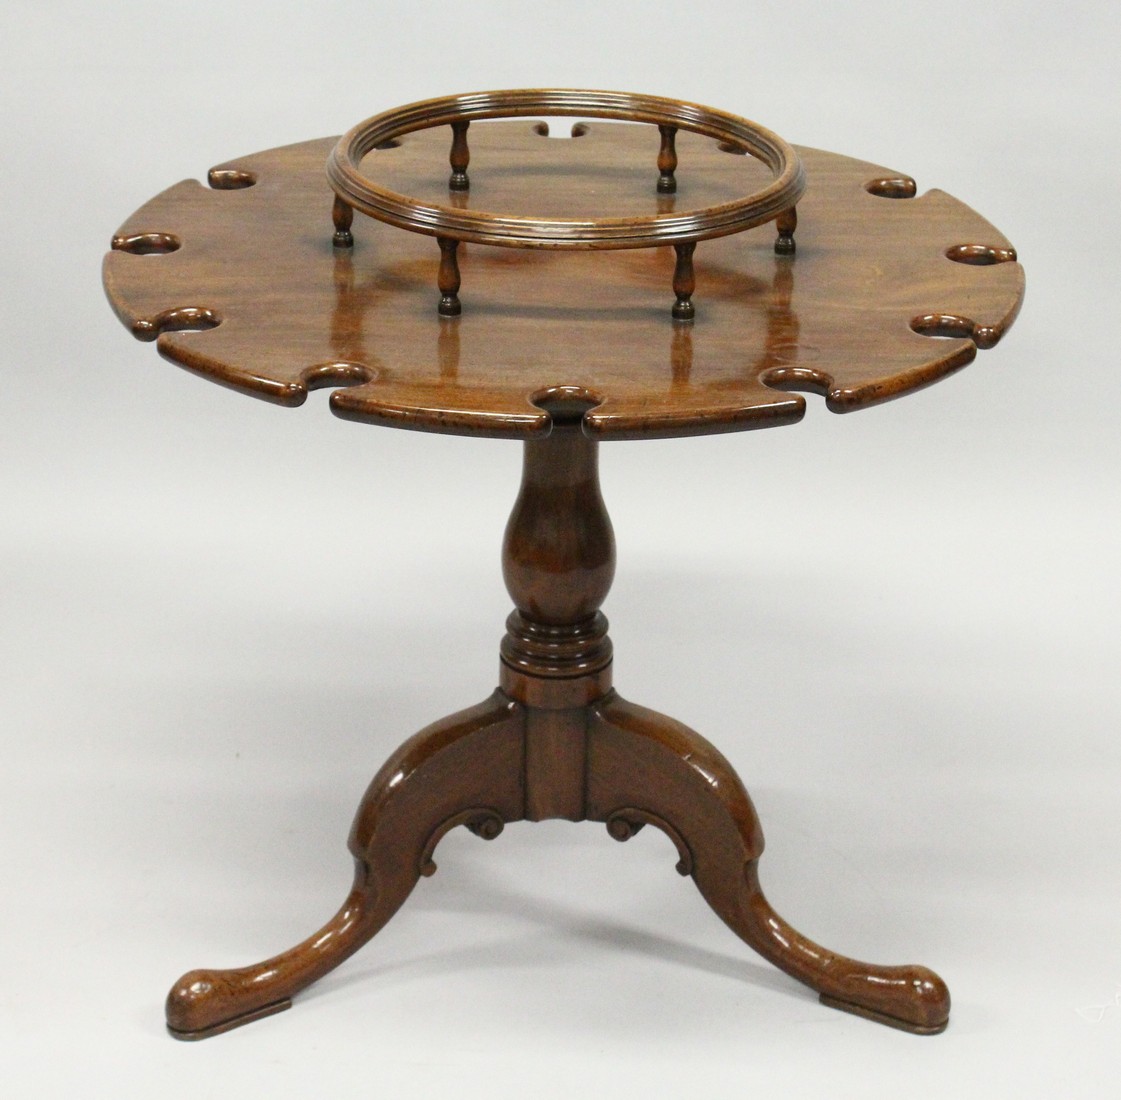 A GEORGE III STYLE MAHOGANY SHIP'S TRIPOD TABLE with centre section for bottles. The sides with